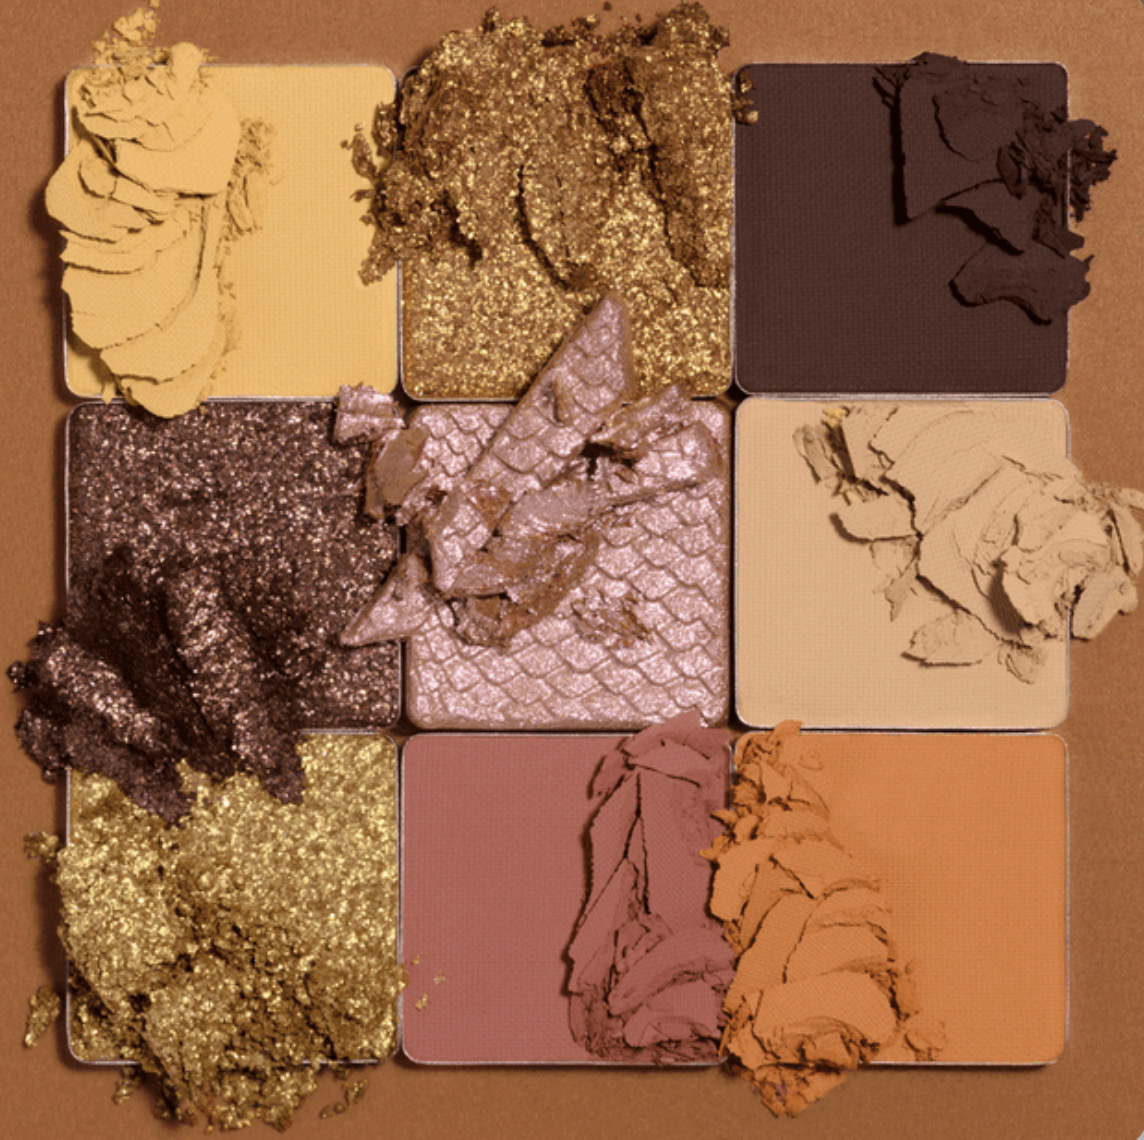 Huda Beauty - Wild Obsessions Eyeshadow Palette - Tiger